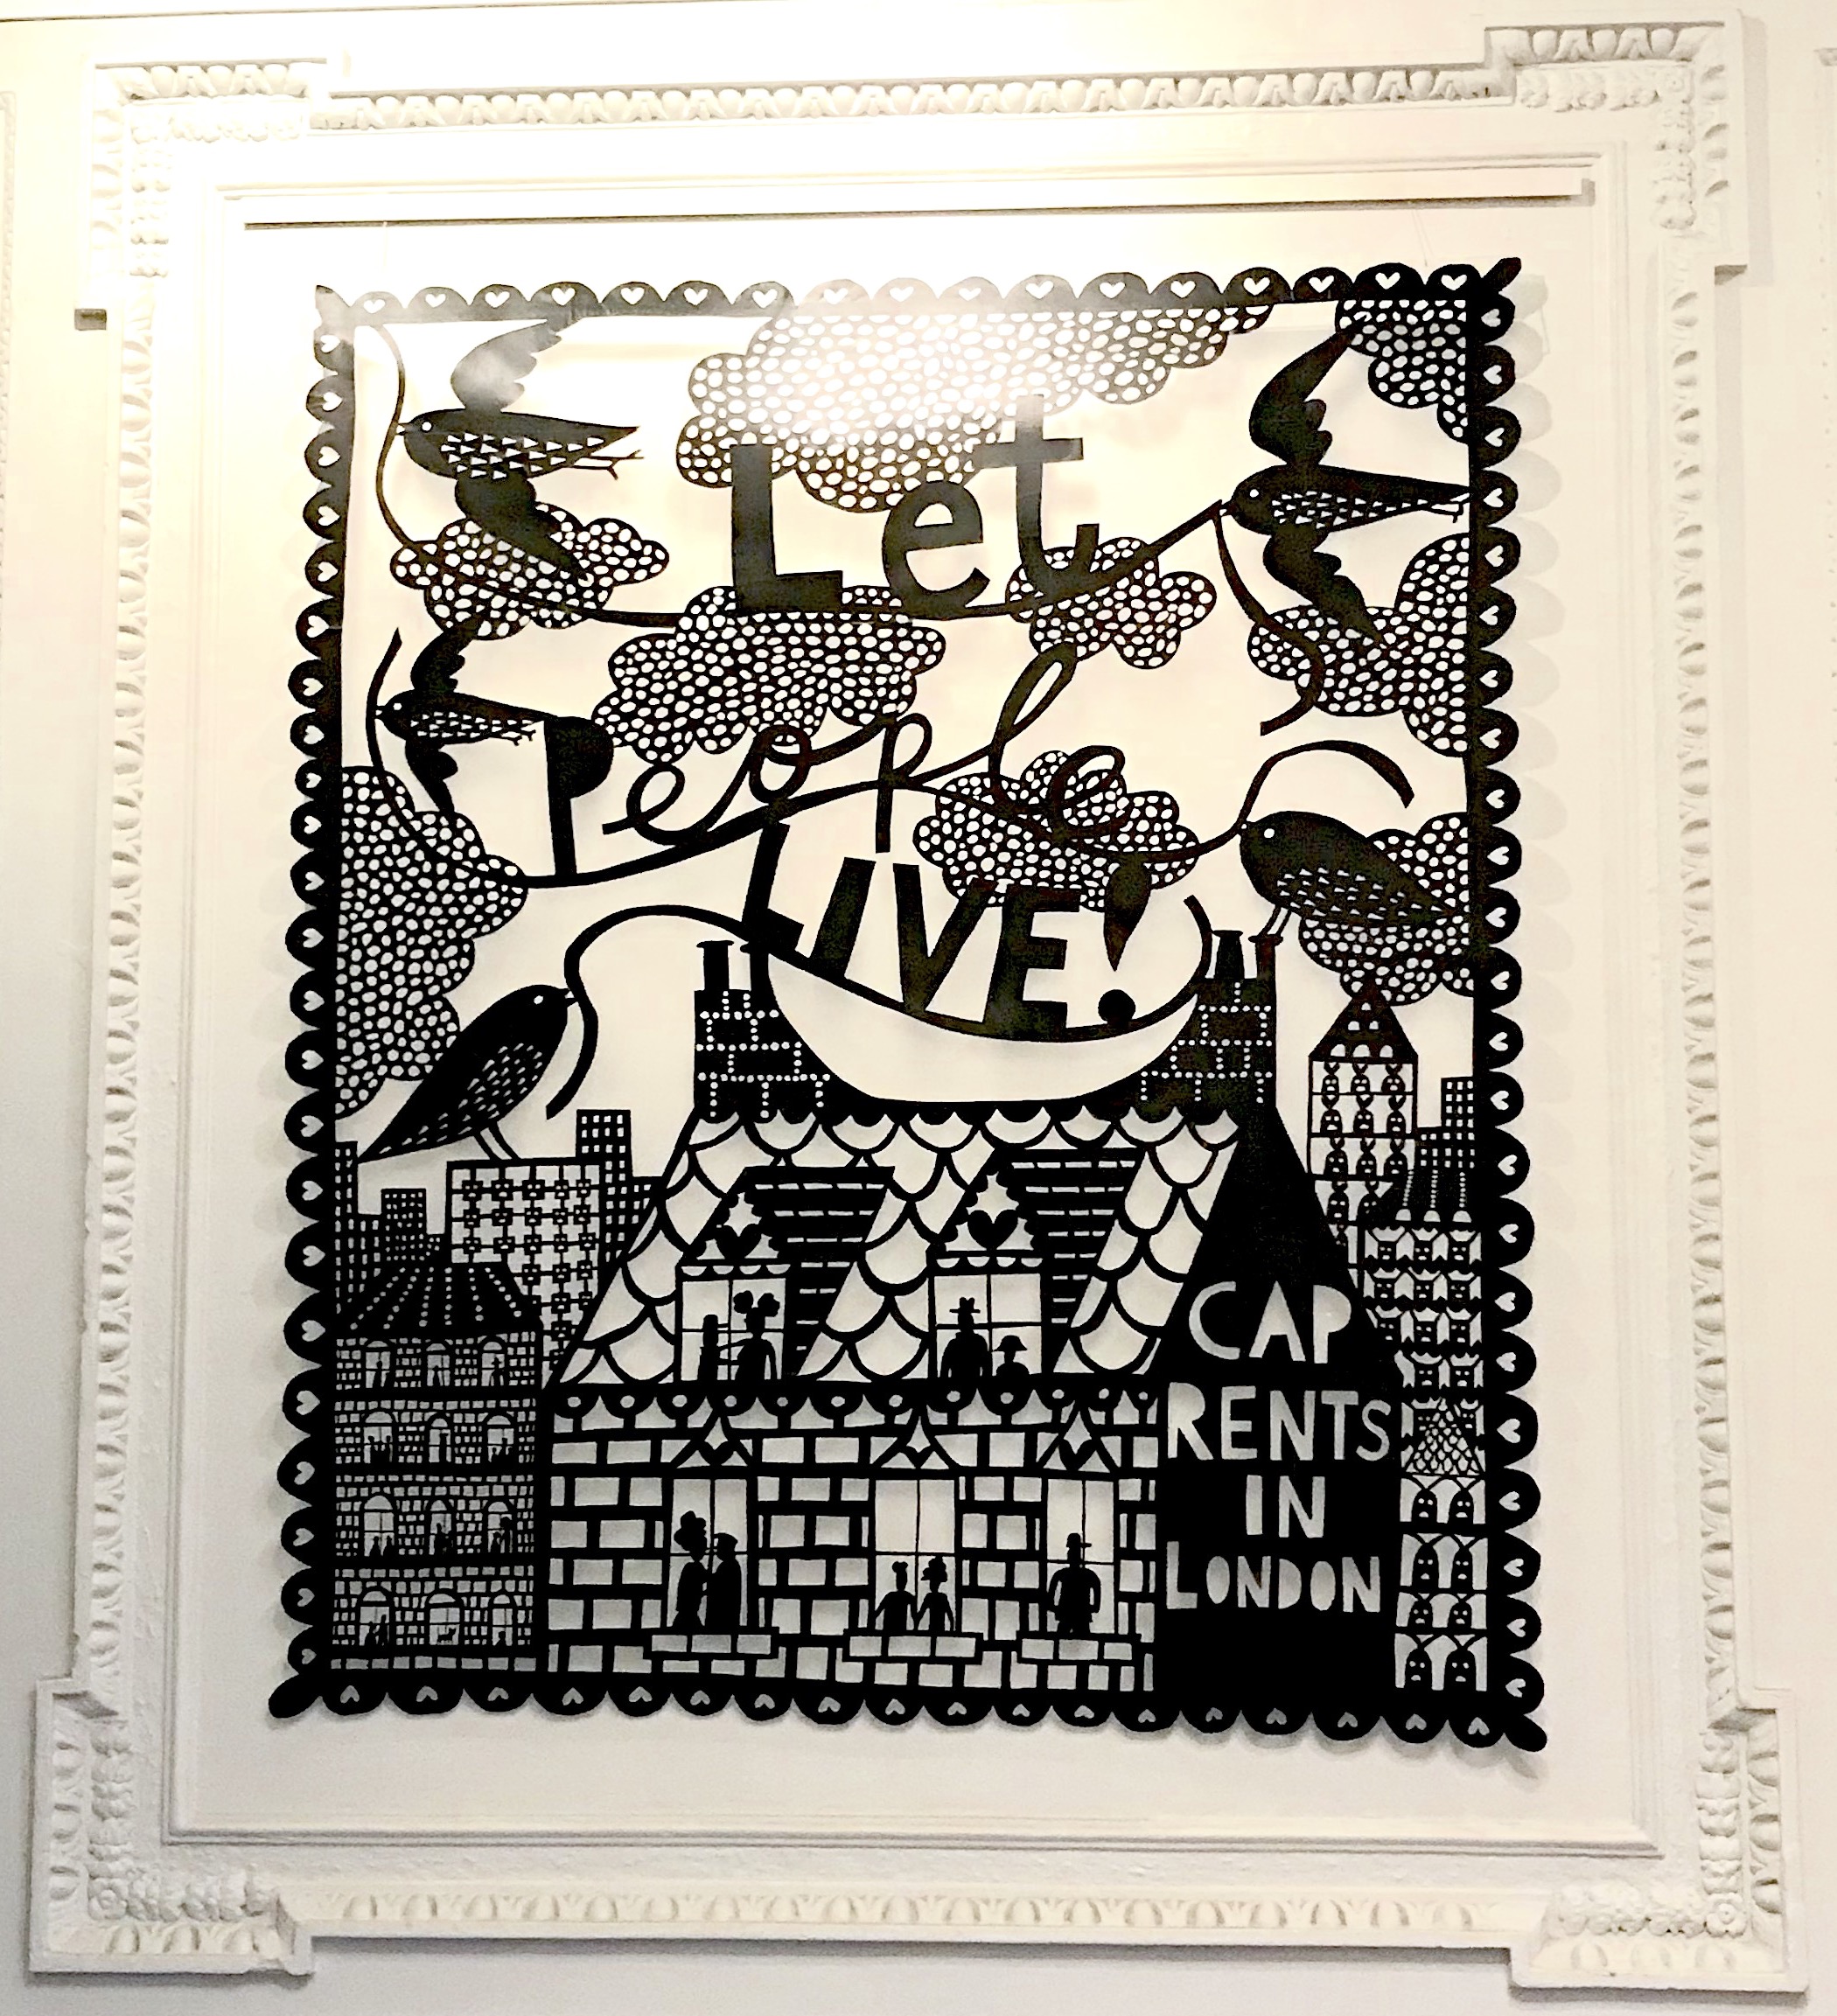 Rob Ryan solo show at the William Morris Gallery